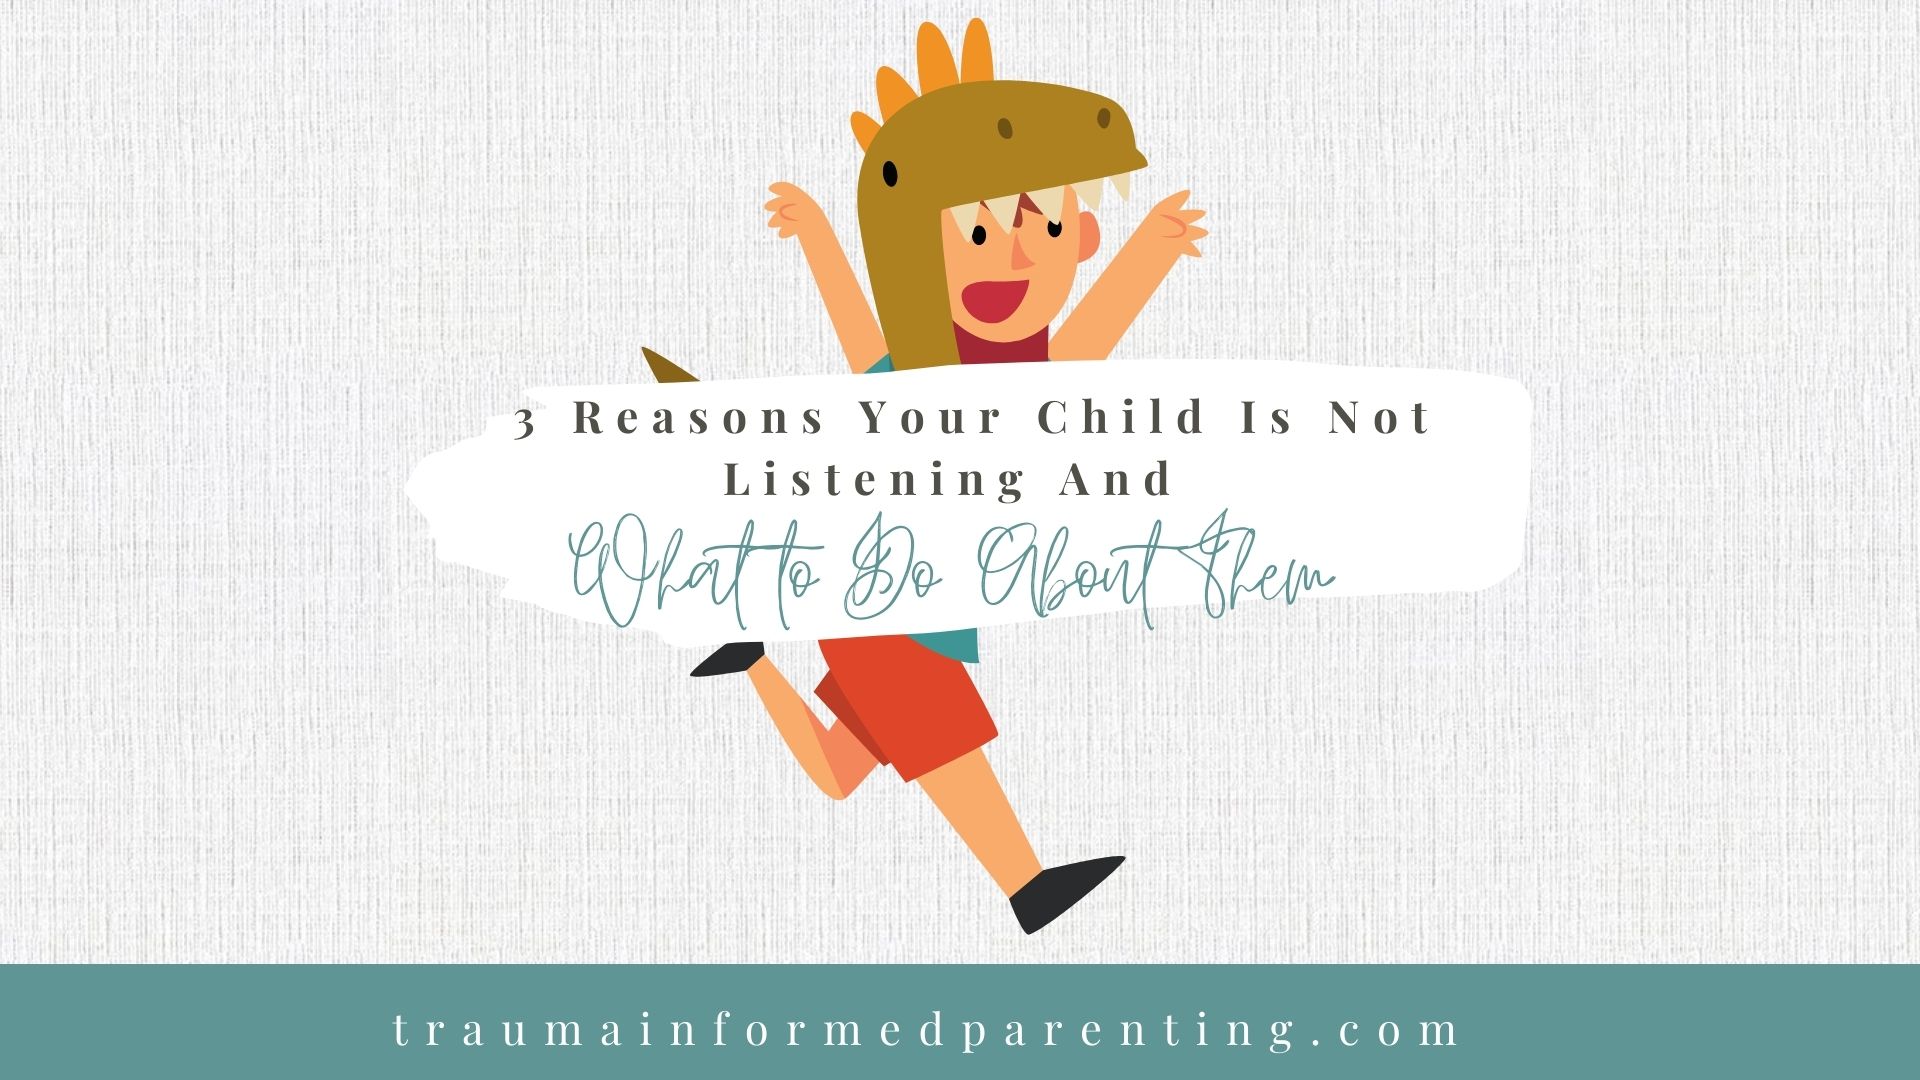 3 Reasons Your Child Is Not Listening and What to Do About Them